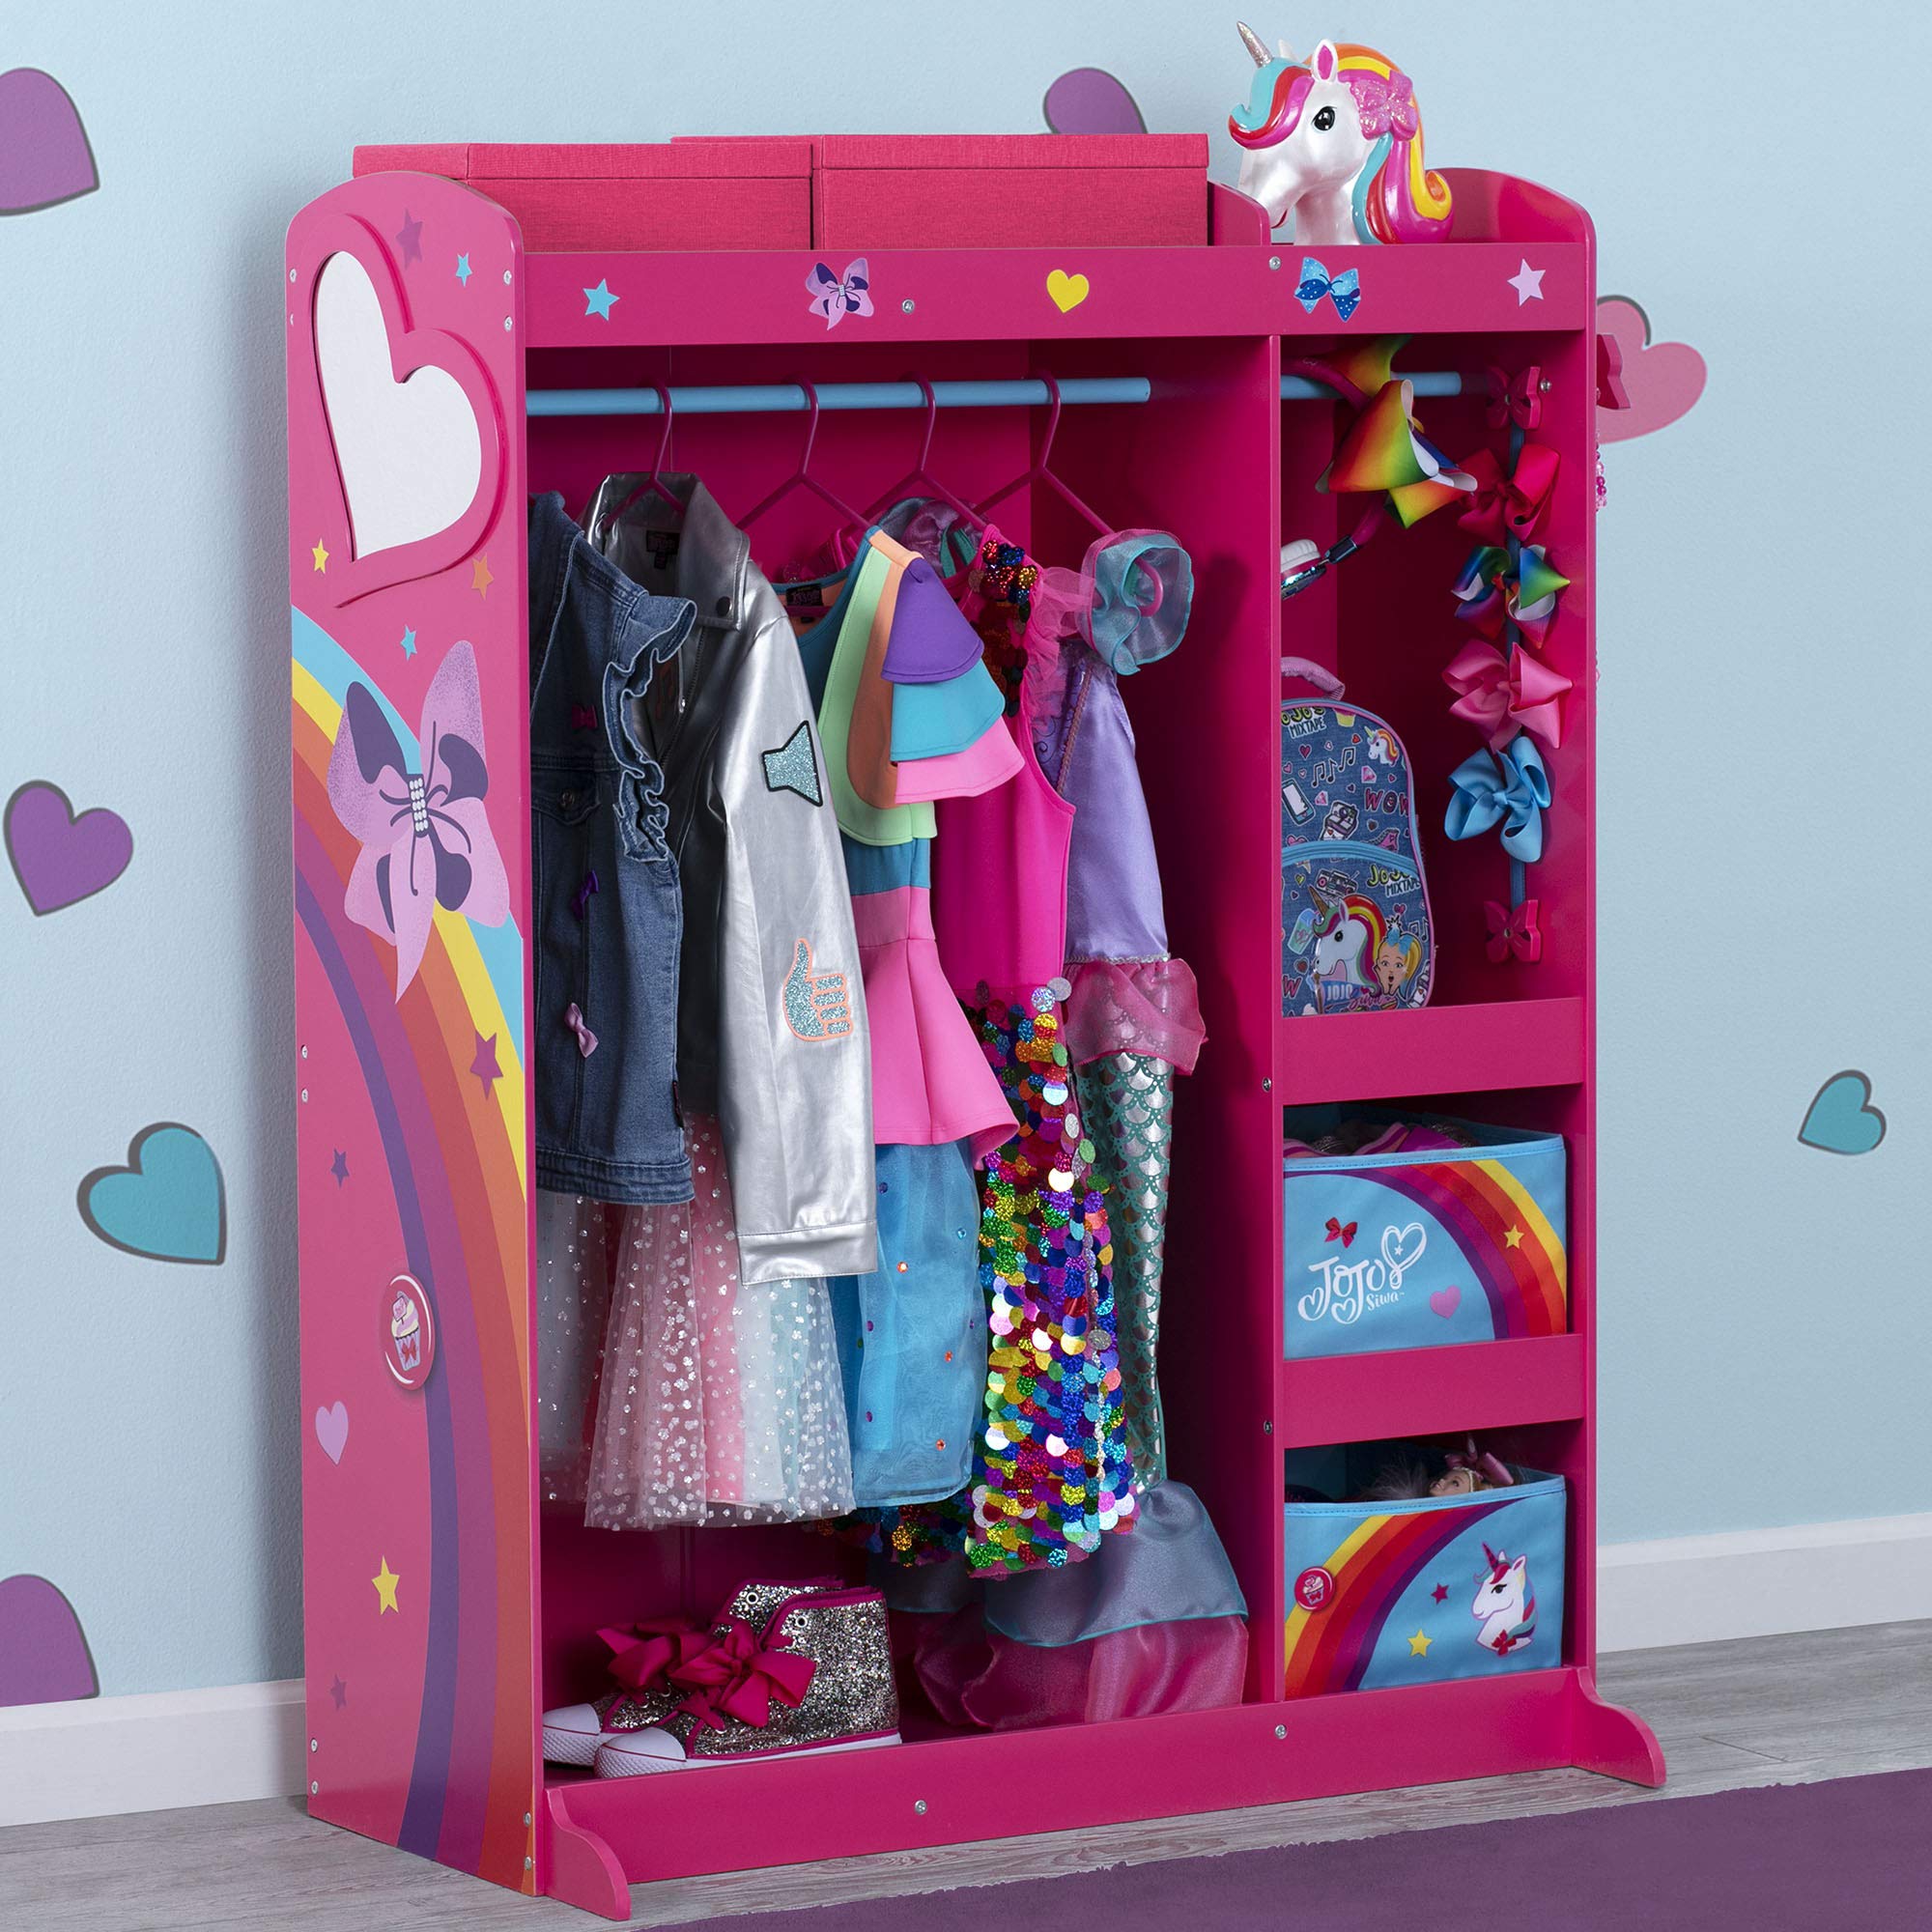 JoJo Siwa Dress and Play Boutique by Delta Children - Pretend Play Costume Storage Wardrobe for Kids with Mirror & Shelves